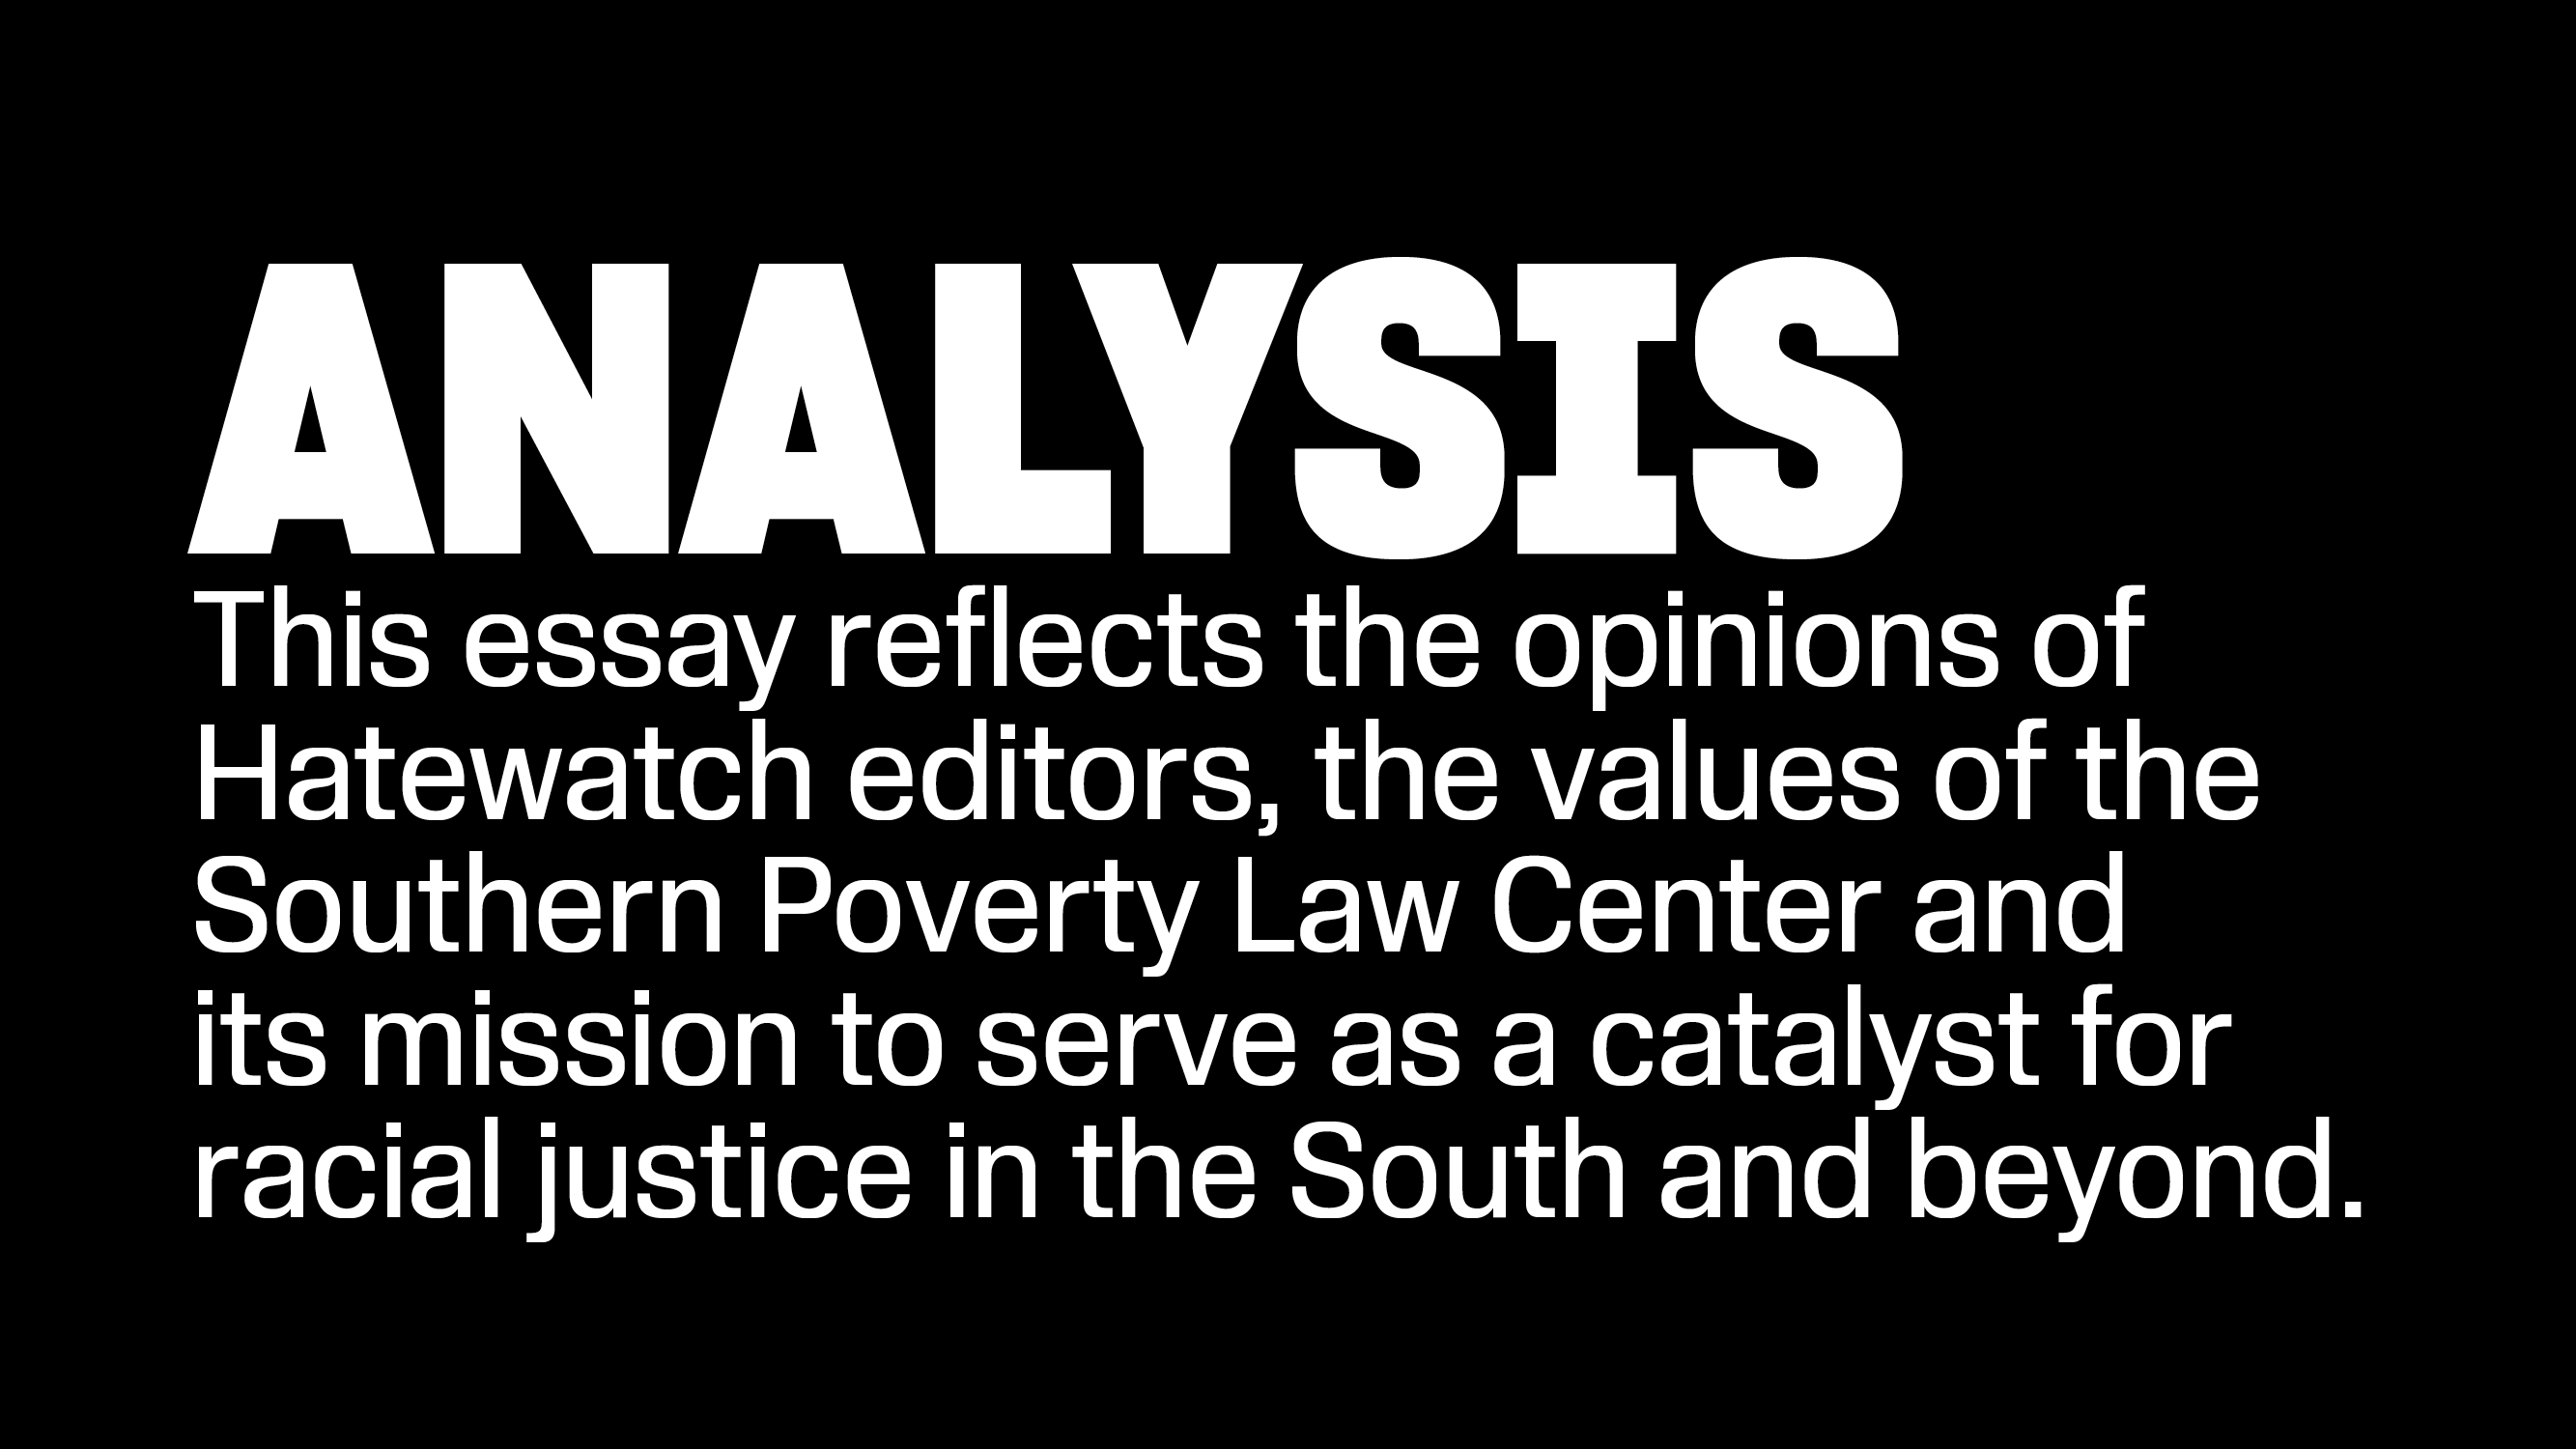 hw analysis bug - Newsweek's Opinion Pages are Now Contaminated by Far-Right Perception Management (SPLC)